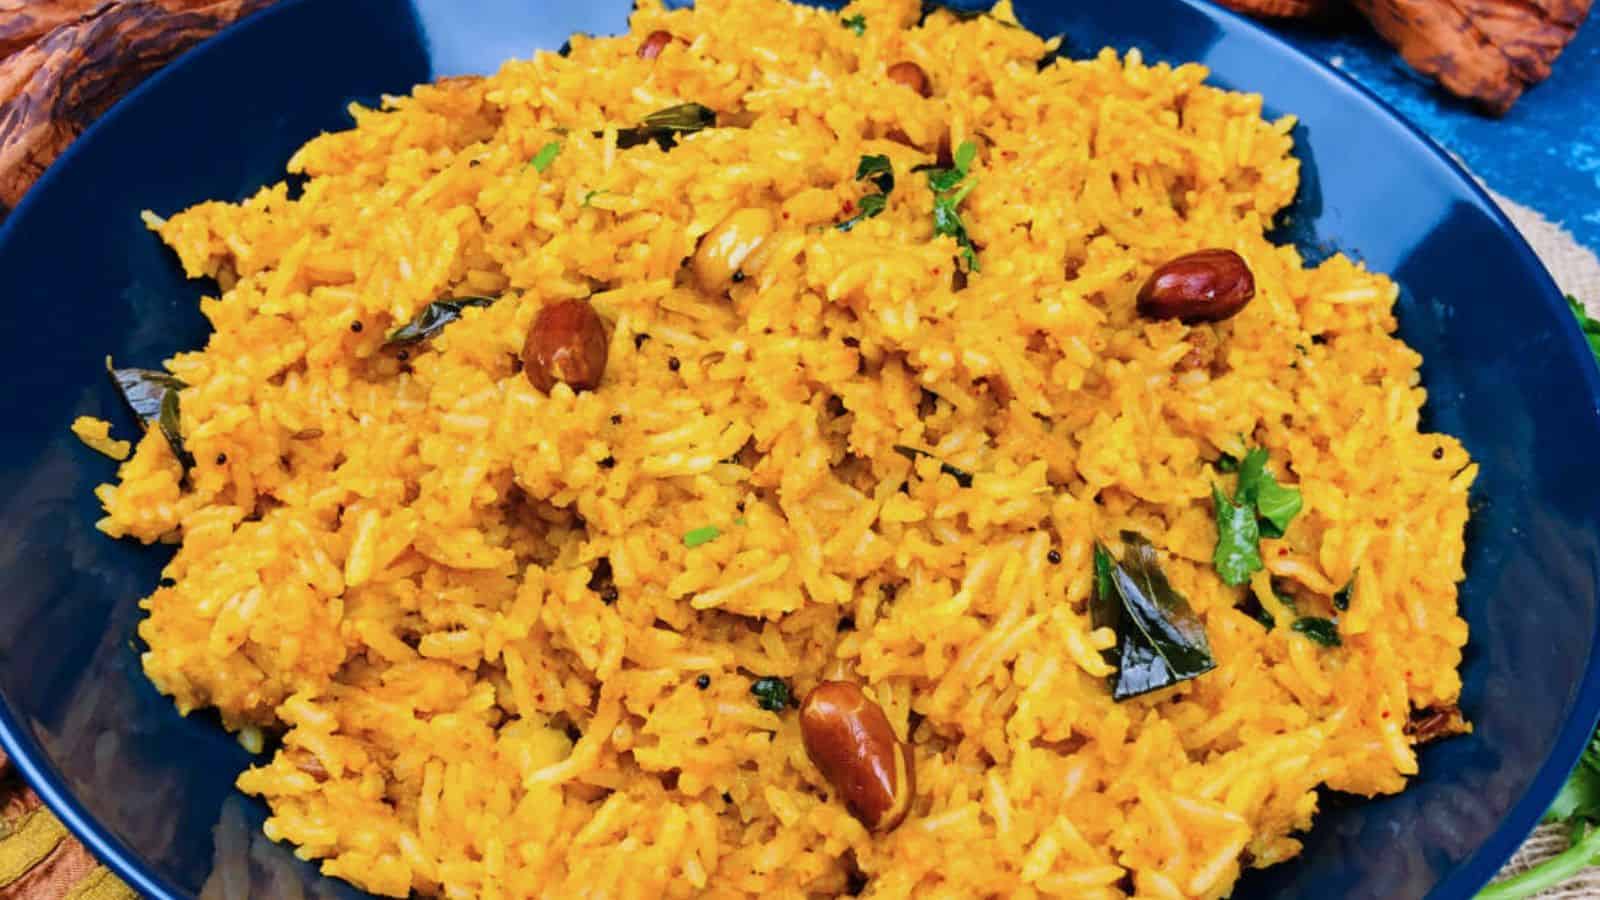 A close-up of a blue bowl filled with yellow spiced rice garnished with peanuts and herbs.